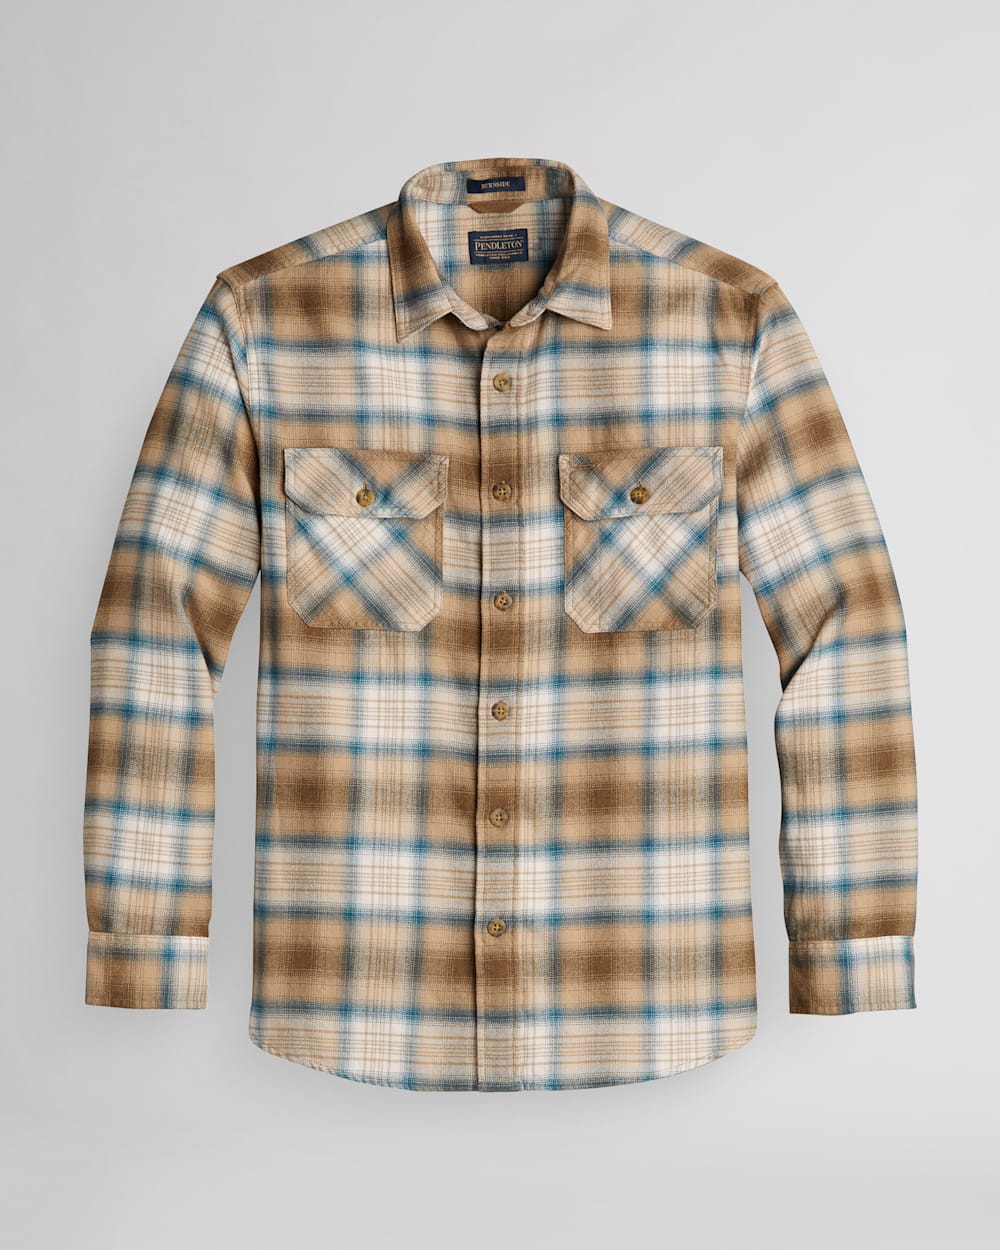 MEN'S PLAID BURNSIDE DOUBLE-BRUSHED FLANNEL SHIRT IN TAN/BROWN/IVORY PLAID image number 1